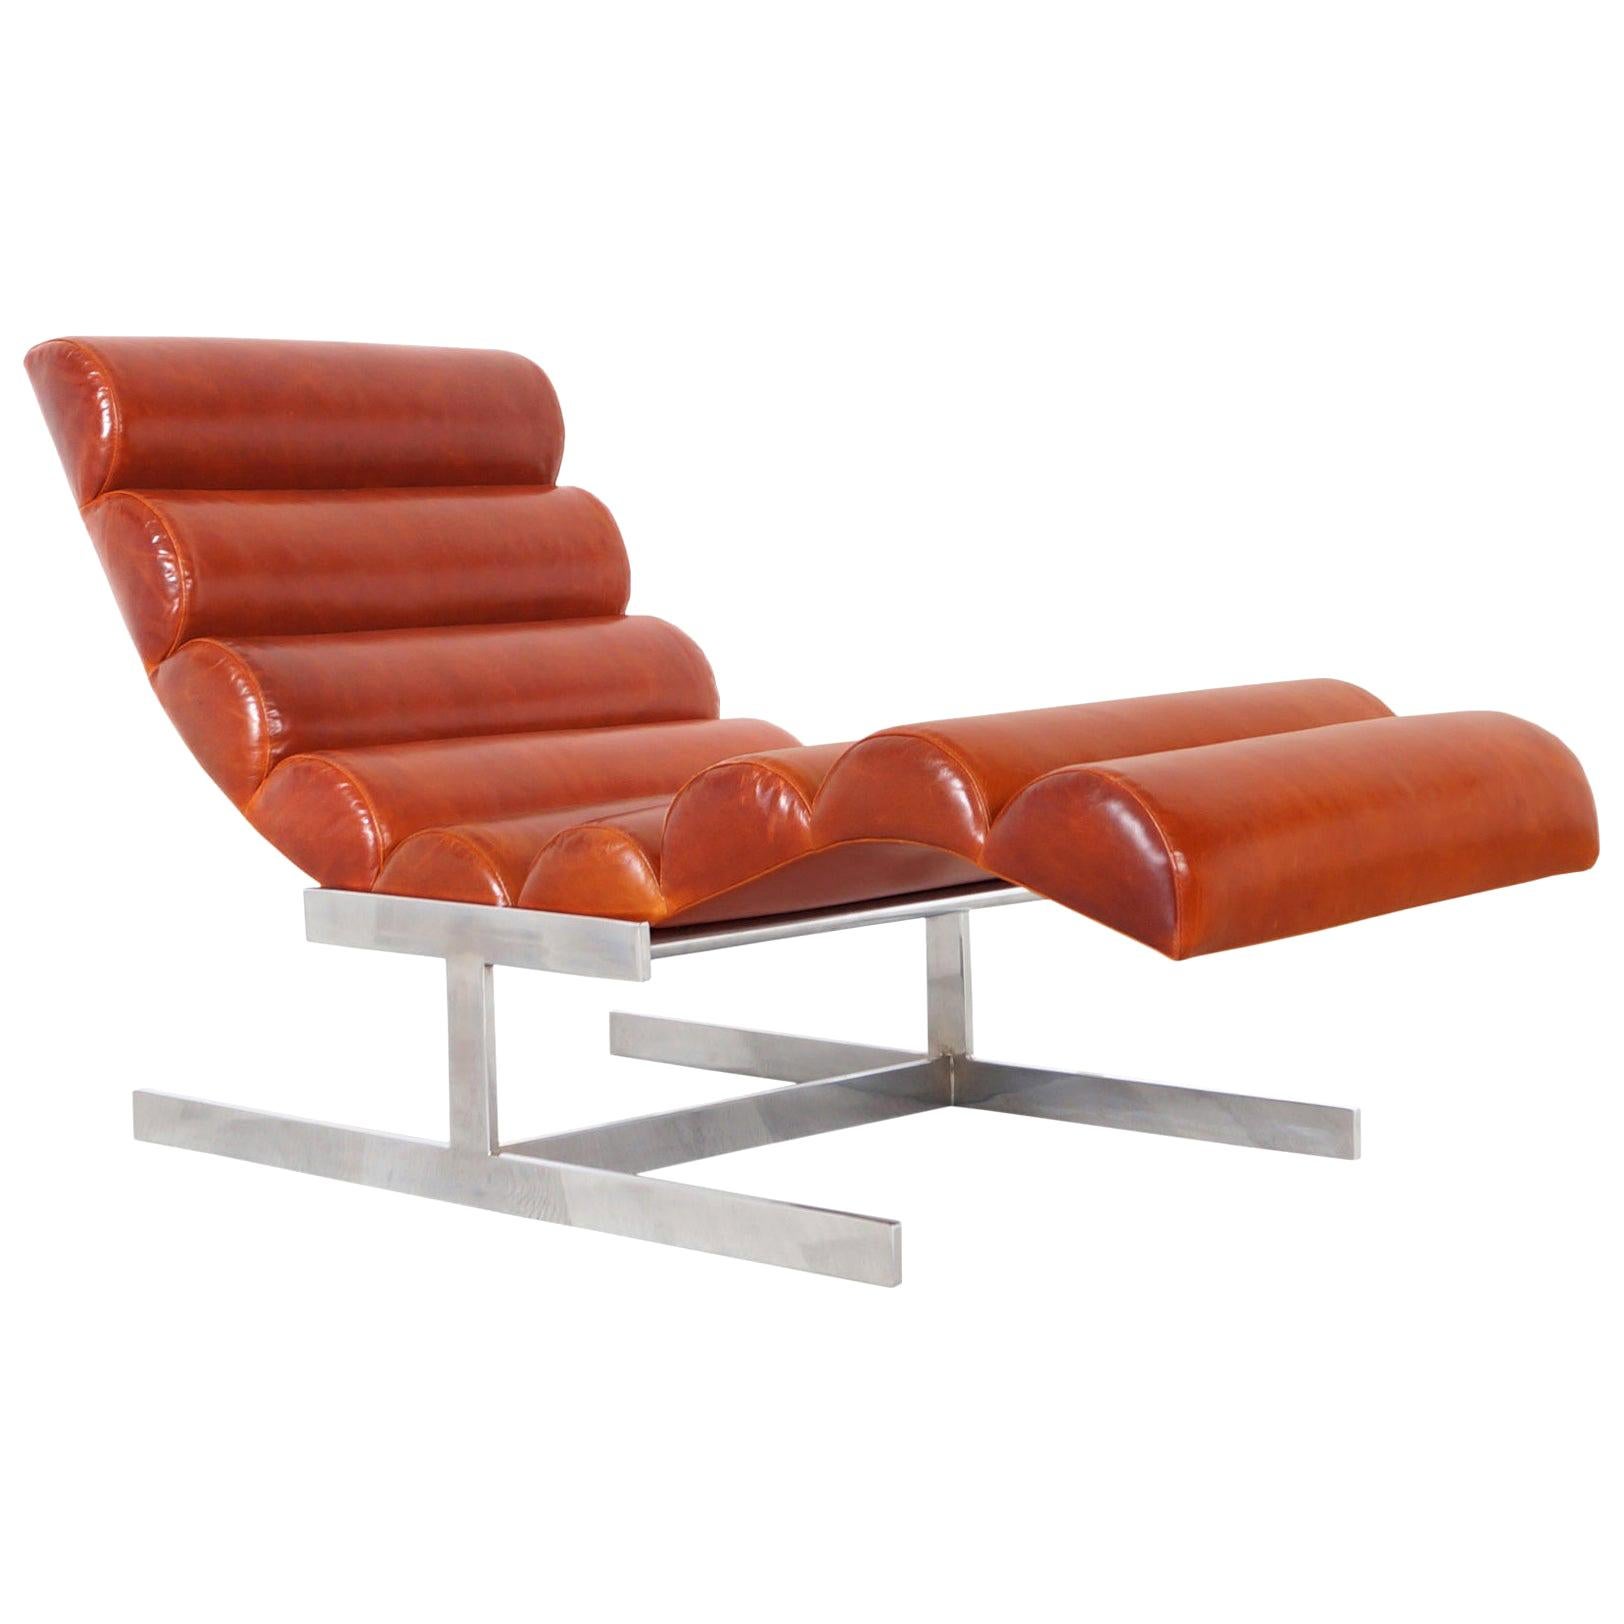 Vintage Chrome and Leather "Wave" Chaise Lounge Attributed to Milo Baughman